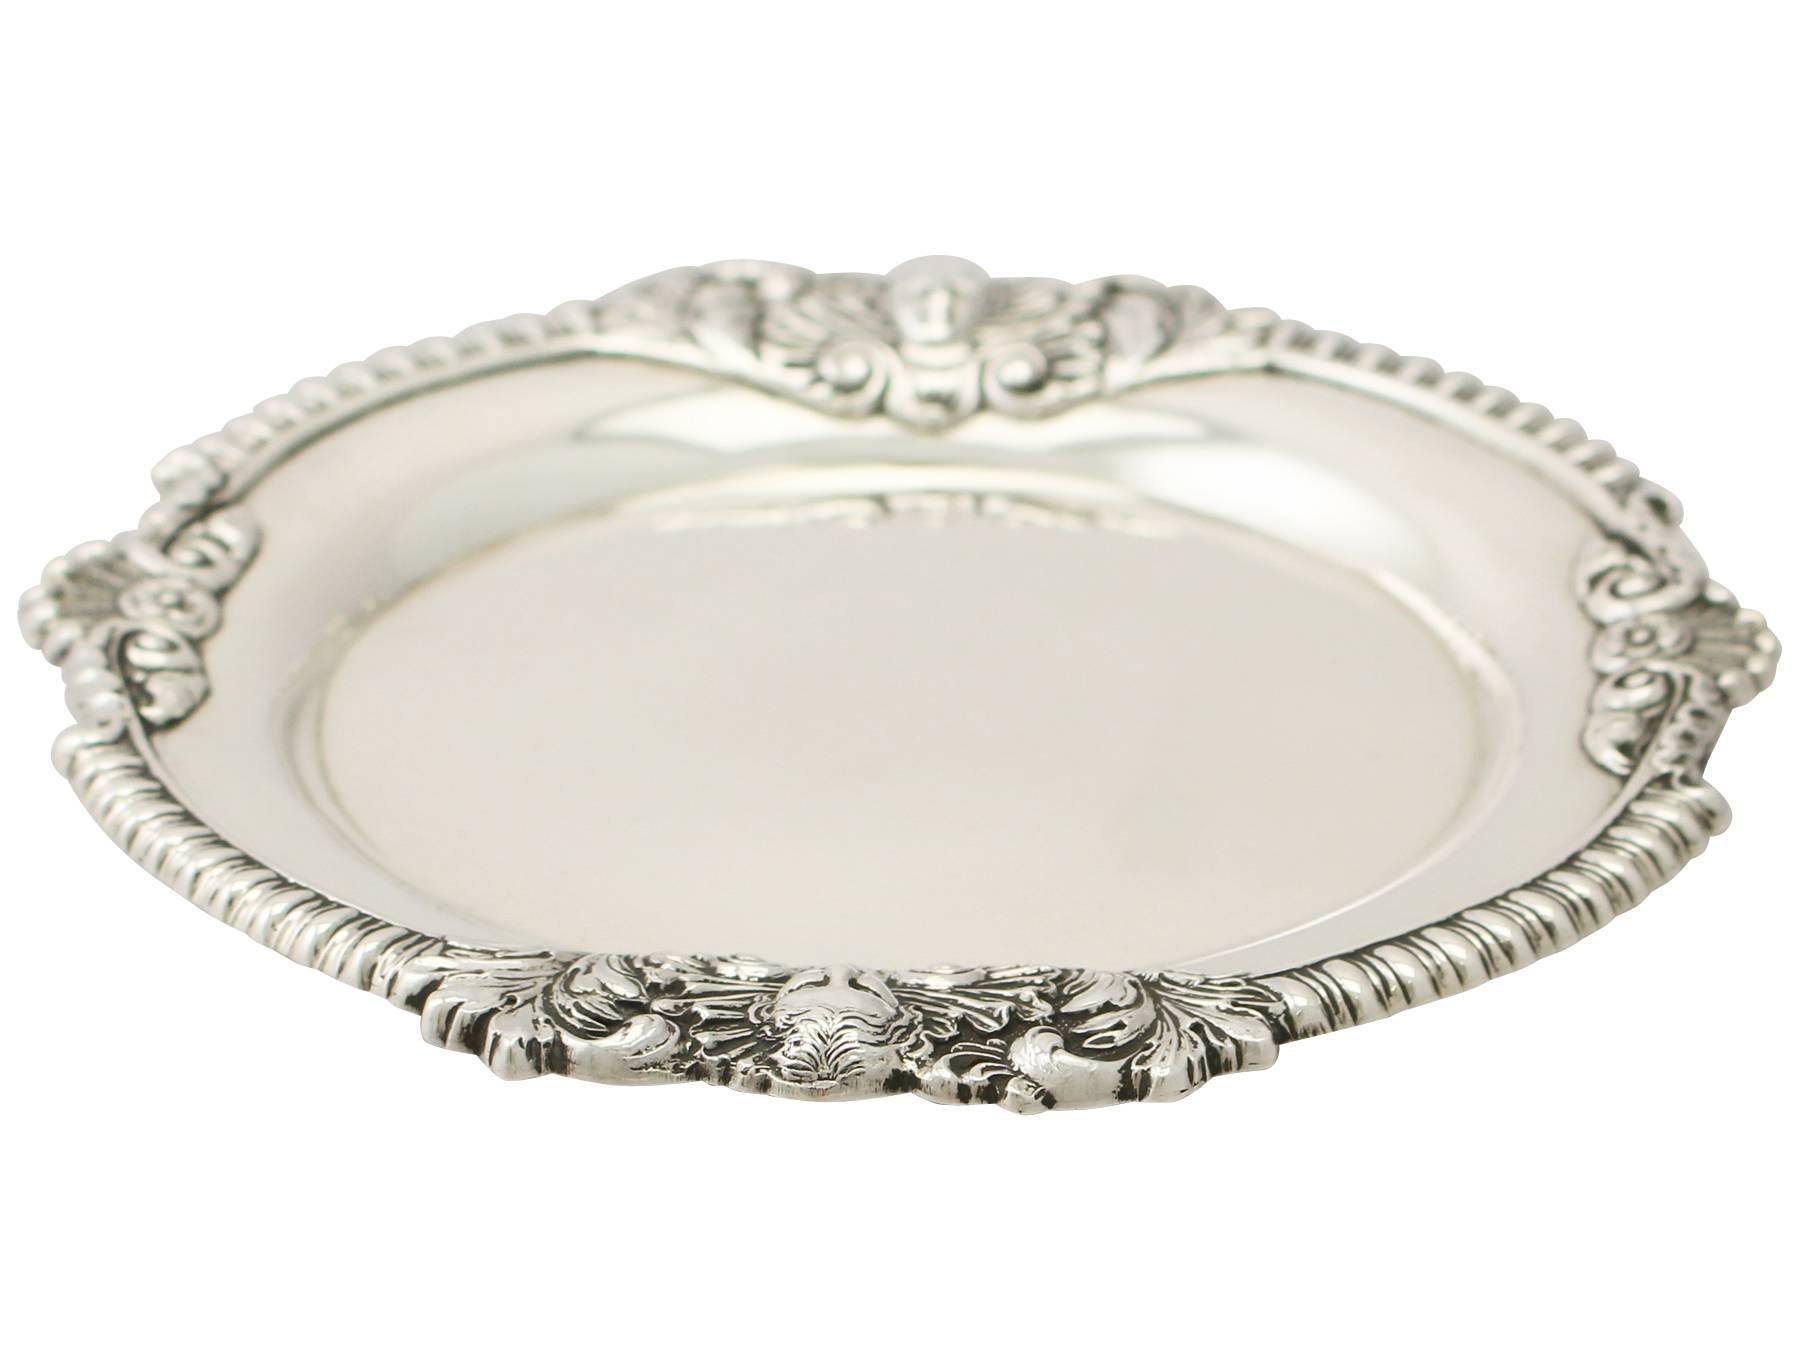 An exceptional, fine and impressive antique Victorian English sterling silver waiter made by Edward Barnard & Sons Ltd, in the Regency style; an addition to our Edwardian dining collection.

This exceptional antique Edwardian English sterling